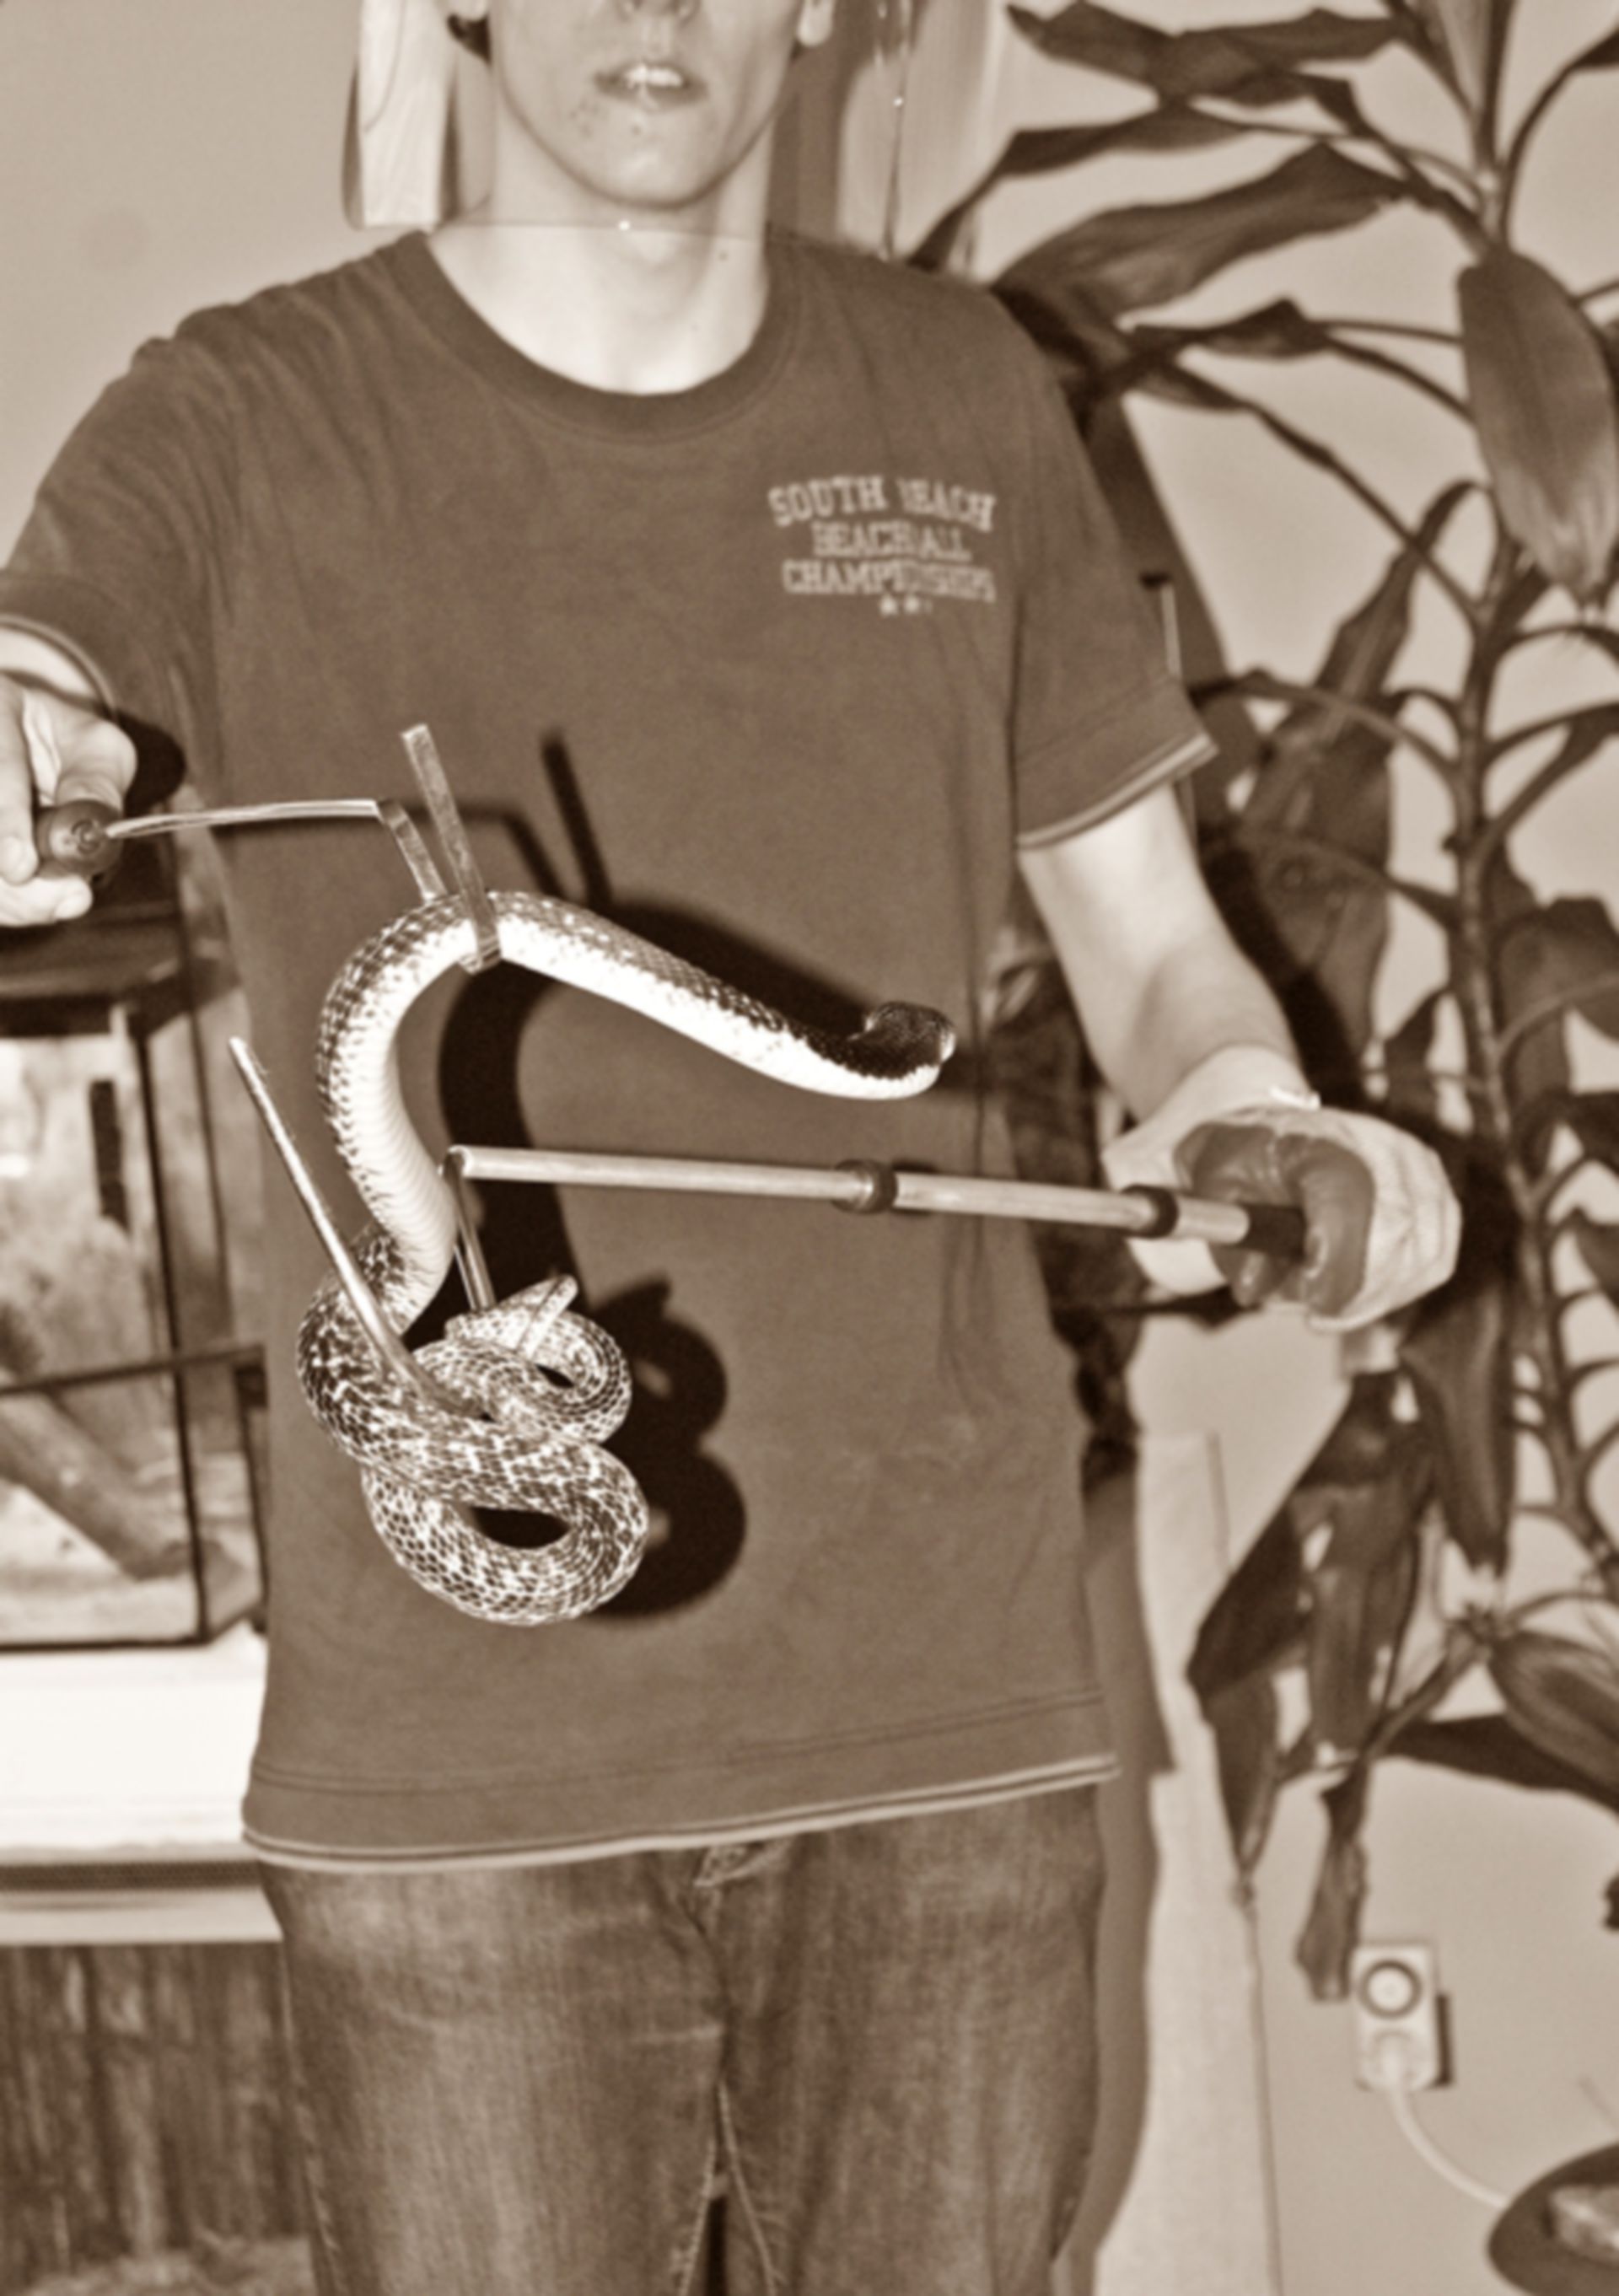 Handling of a poisonous snake